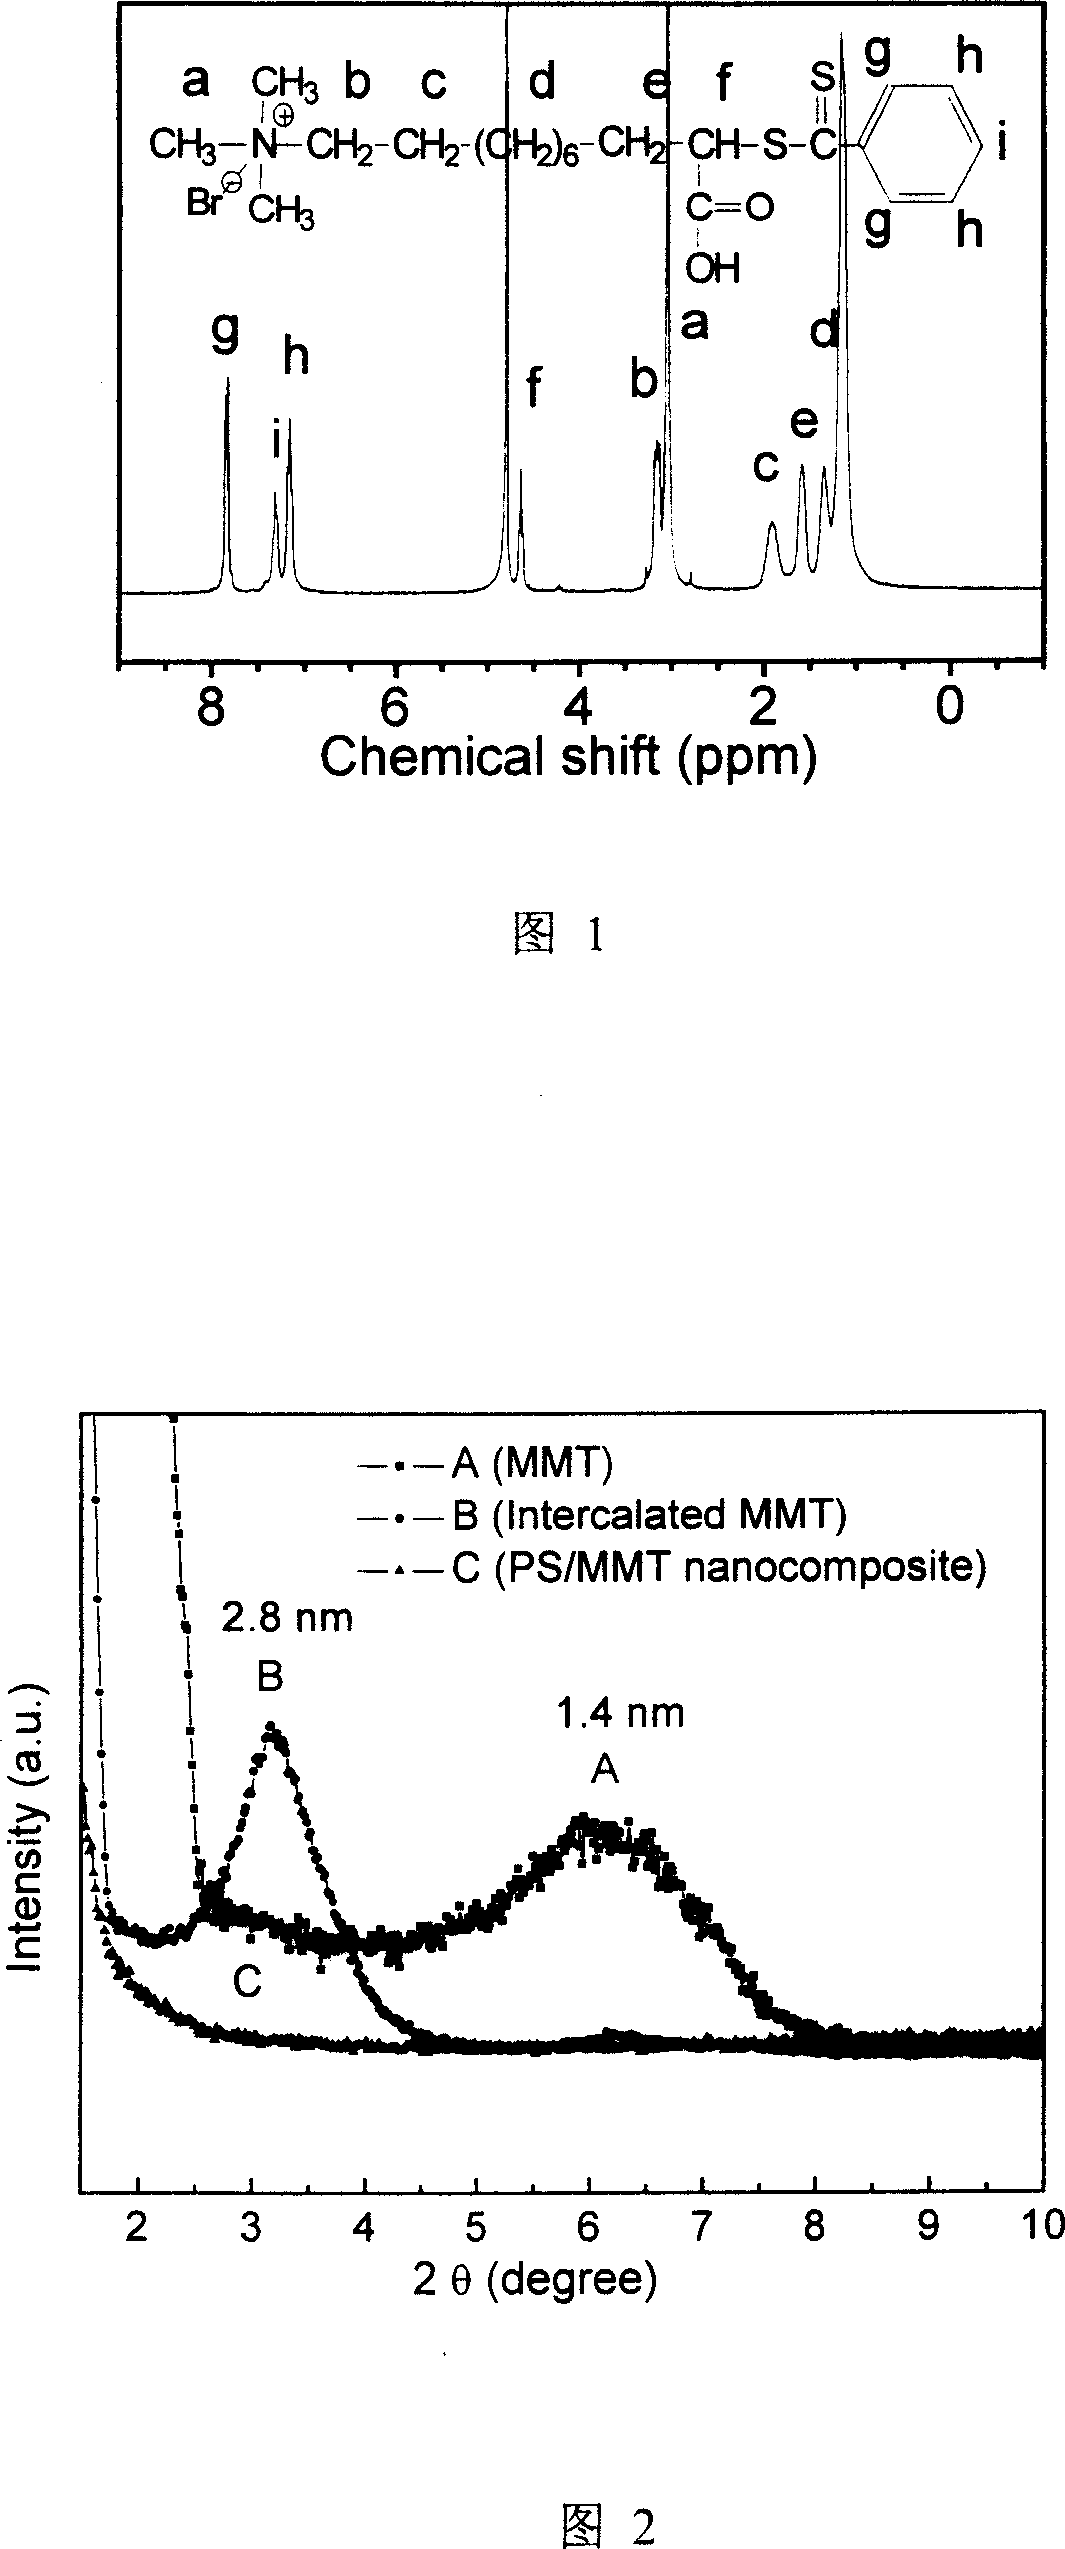 Process of preparing polymer/imvite nano composite material by surface controlling polymerization